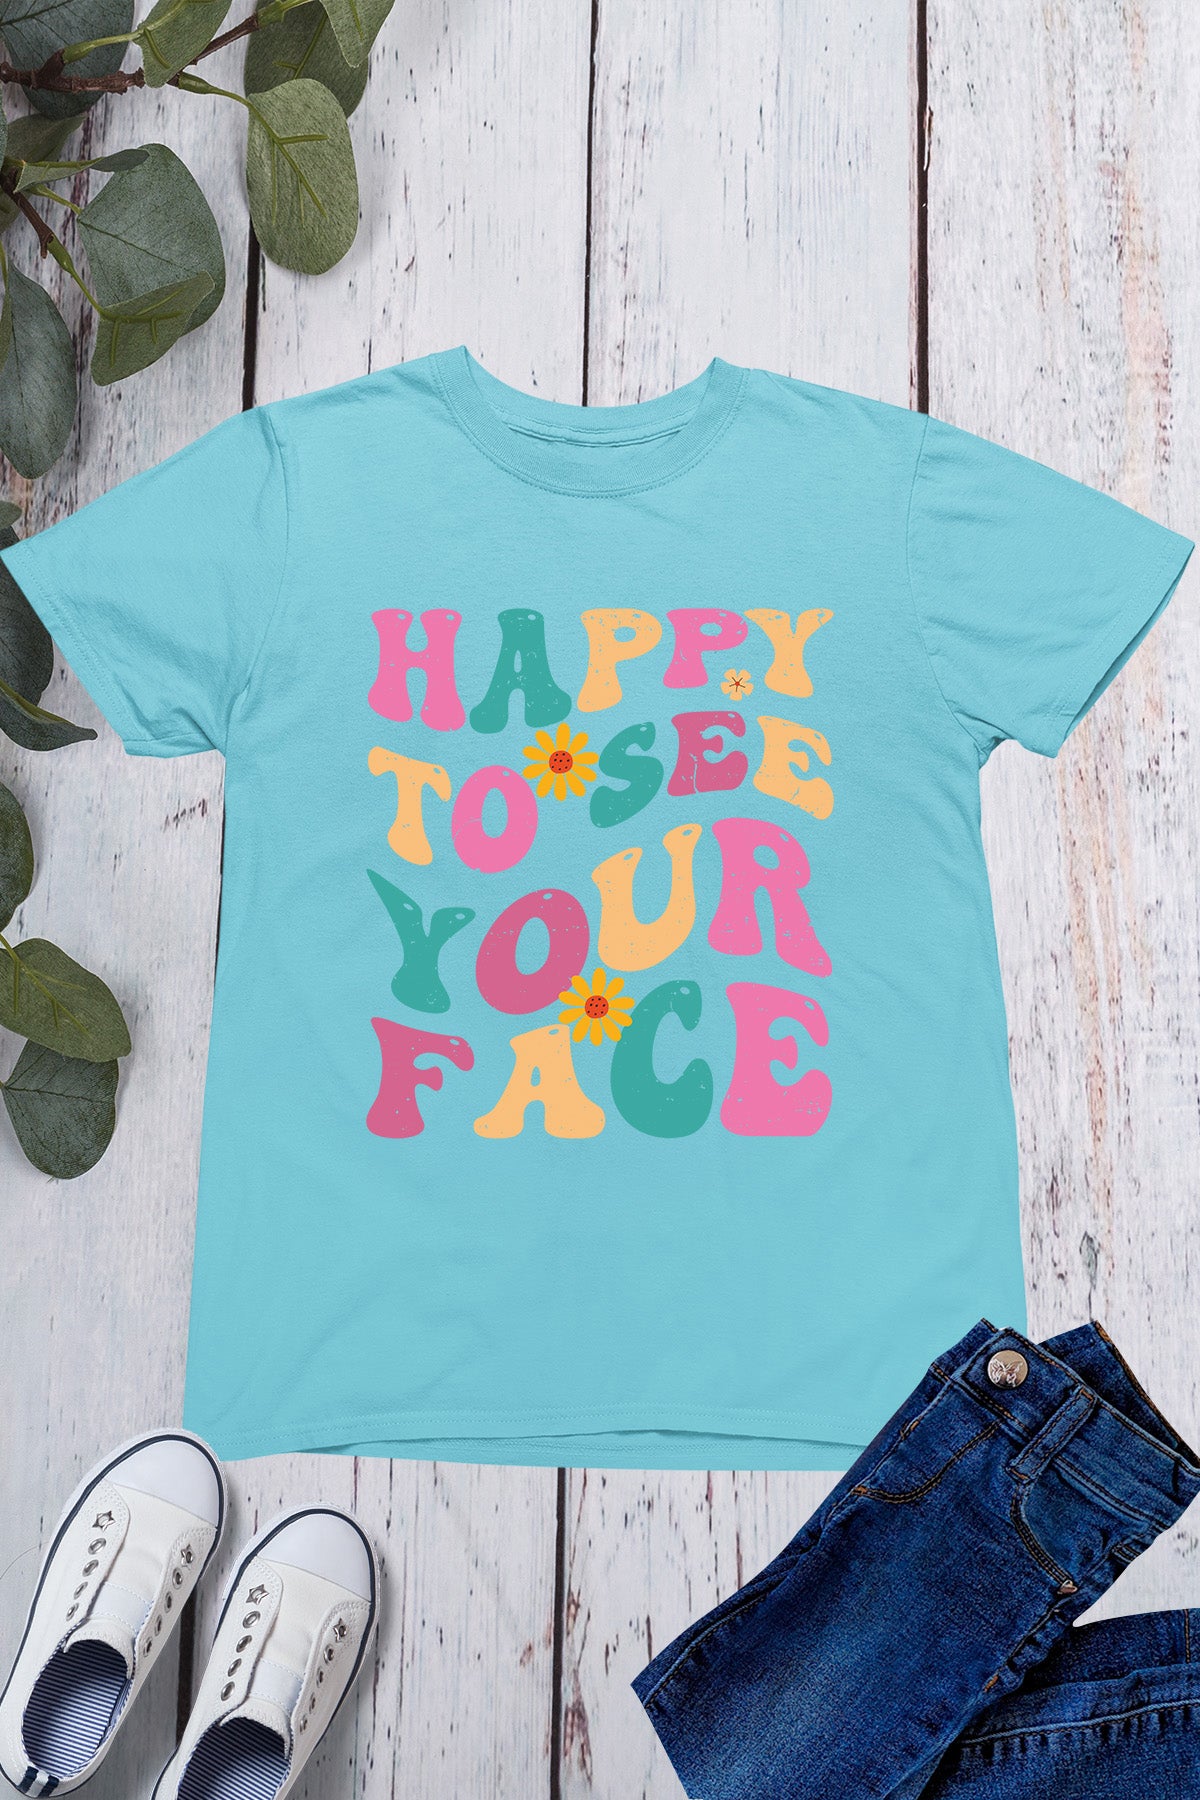 Happy to See Your face School T Shirt